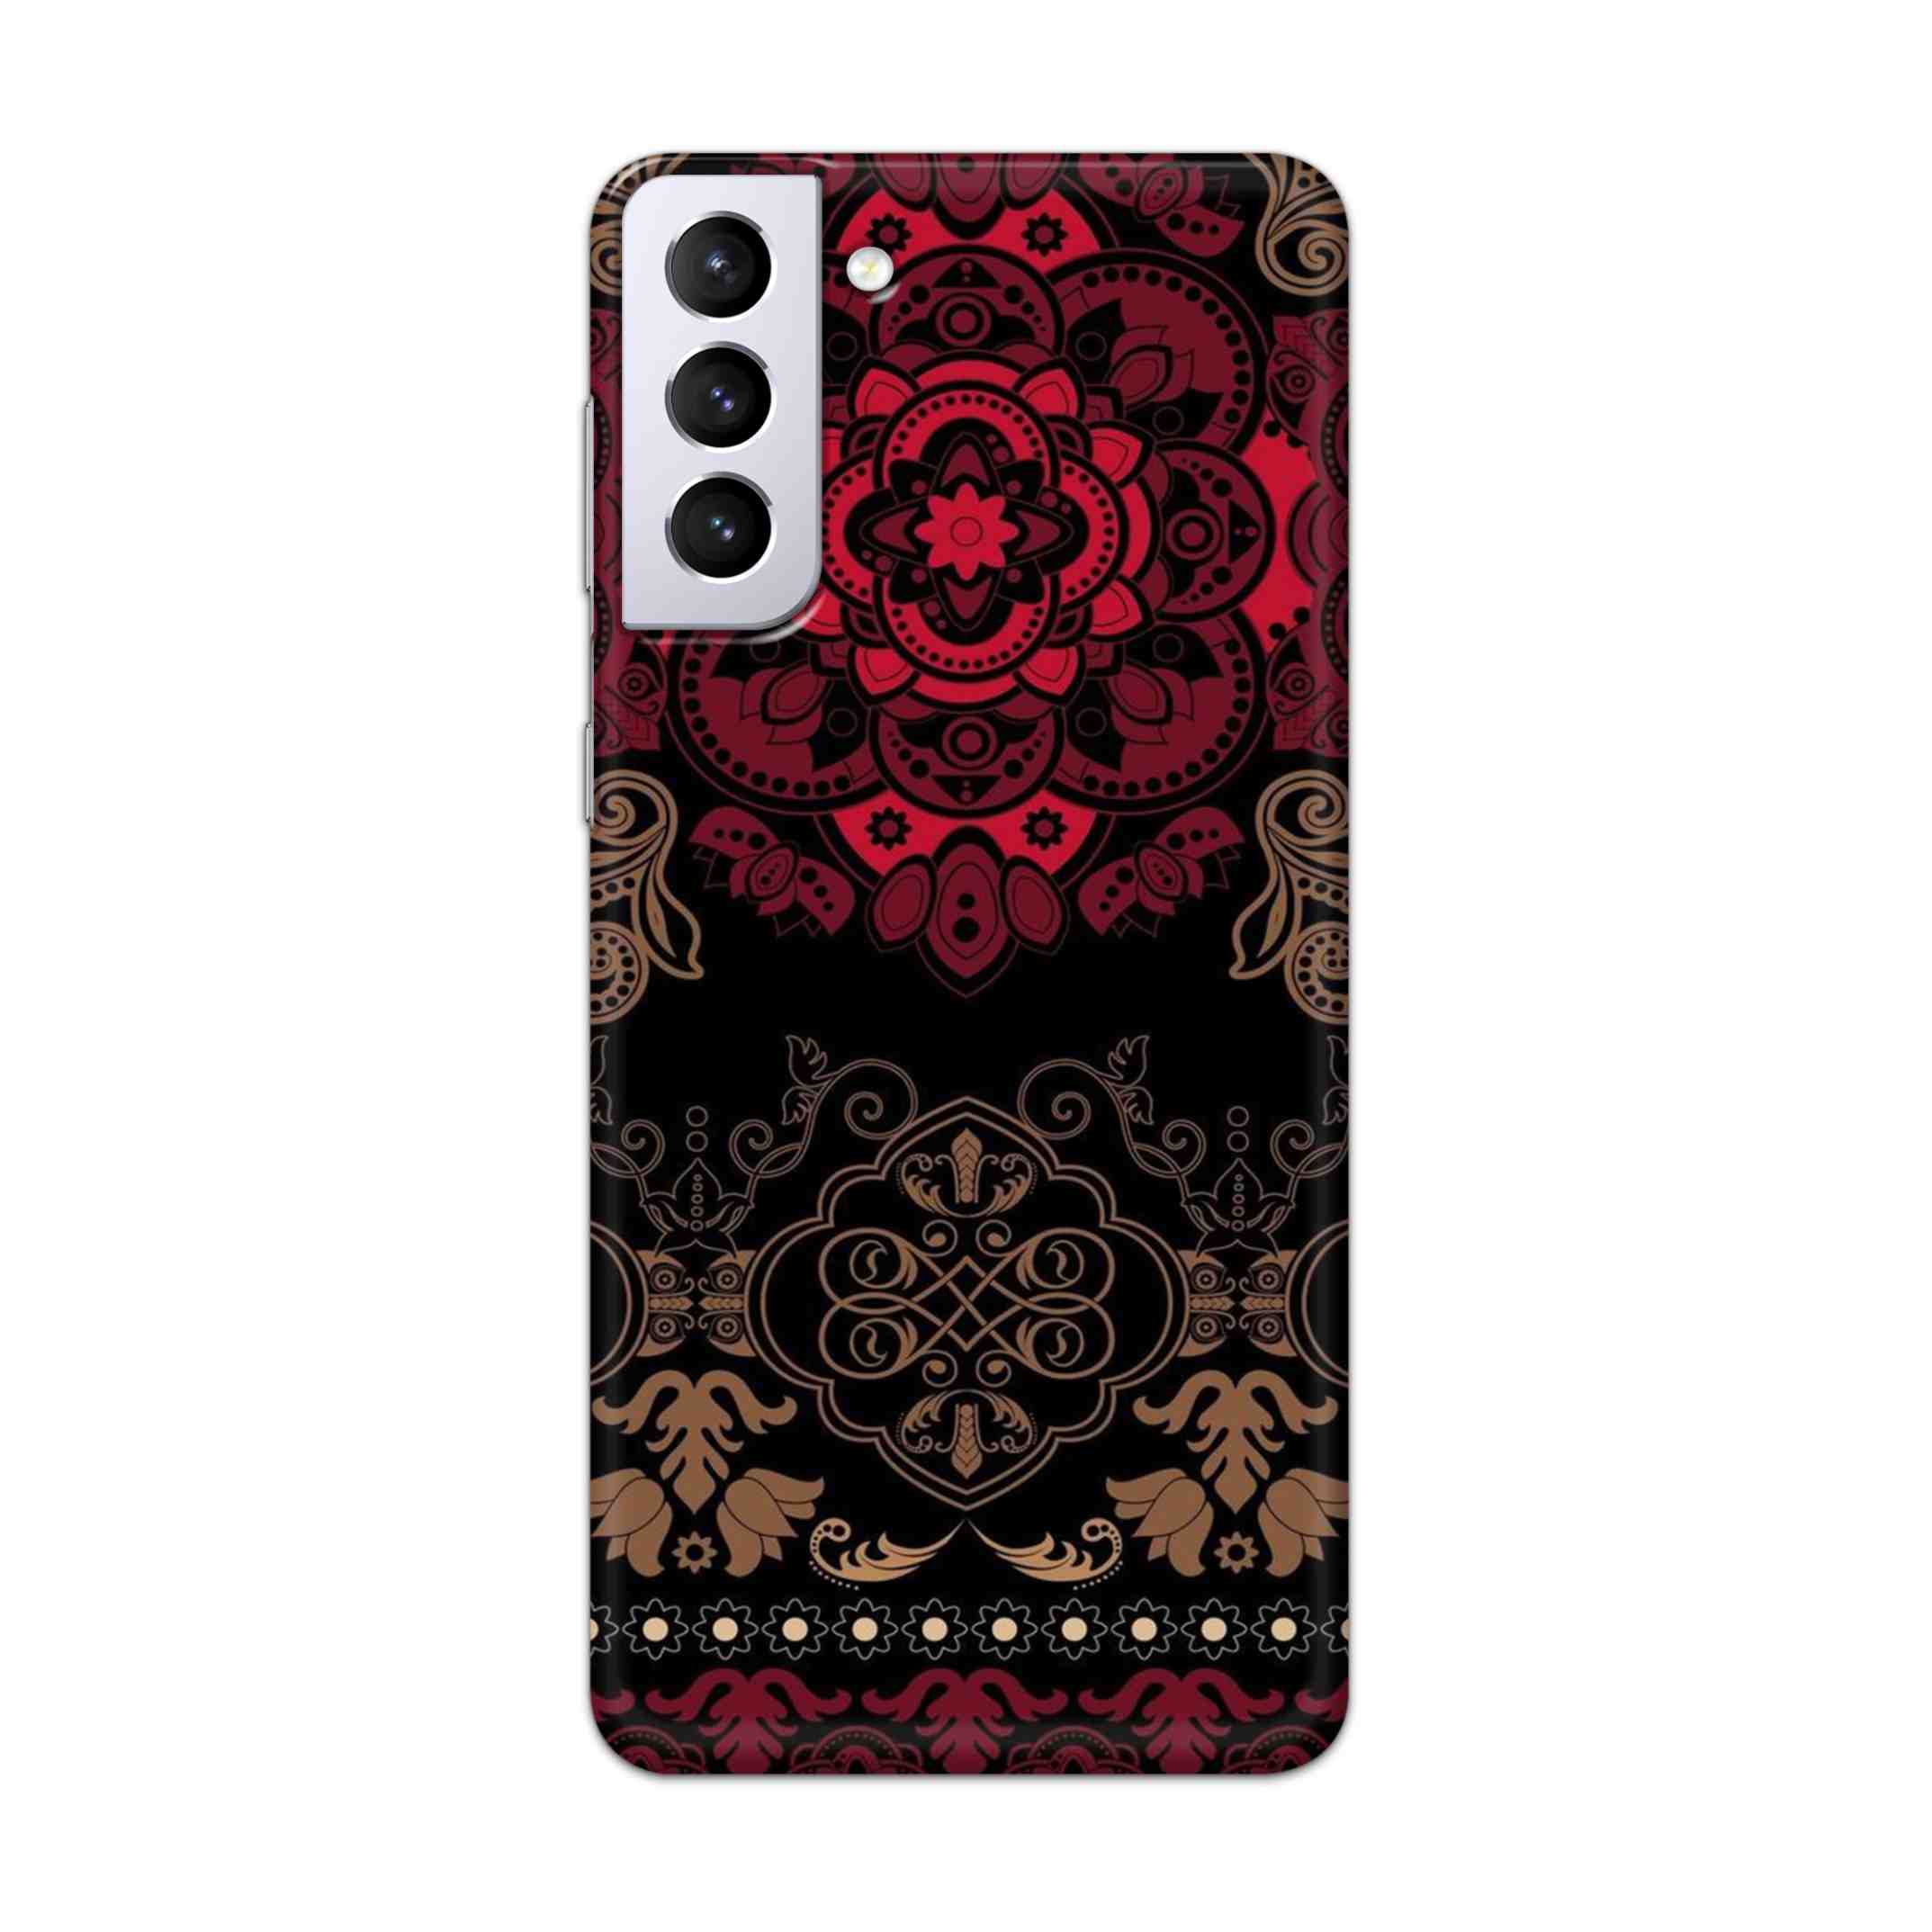 Buy Christian Mandalas Hard Back Mobile Phone Case Cover For Samsung Galaxy S21 Plus Online